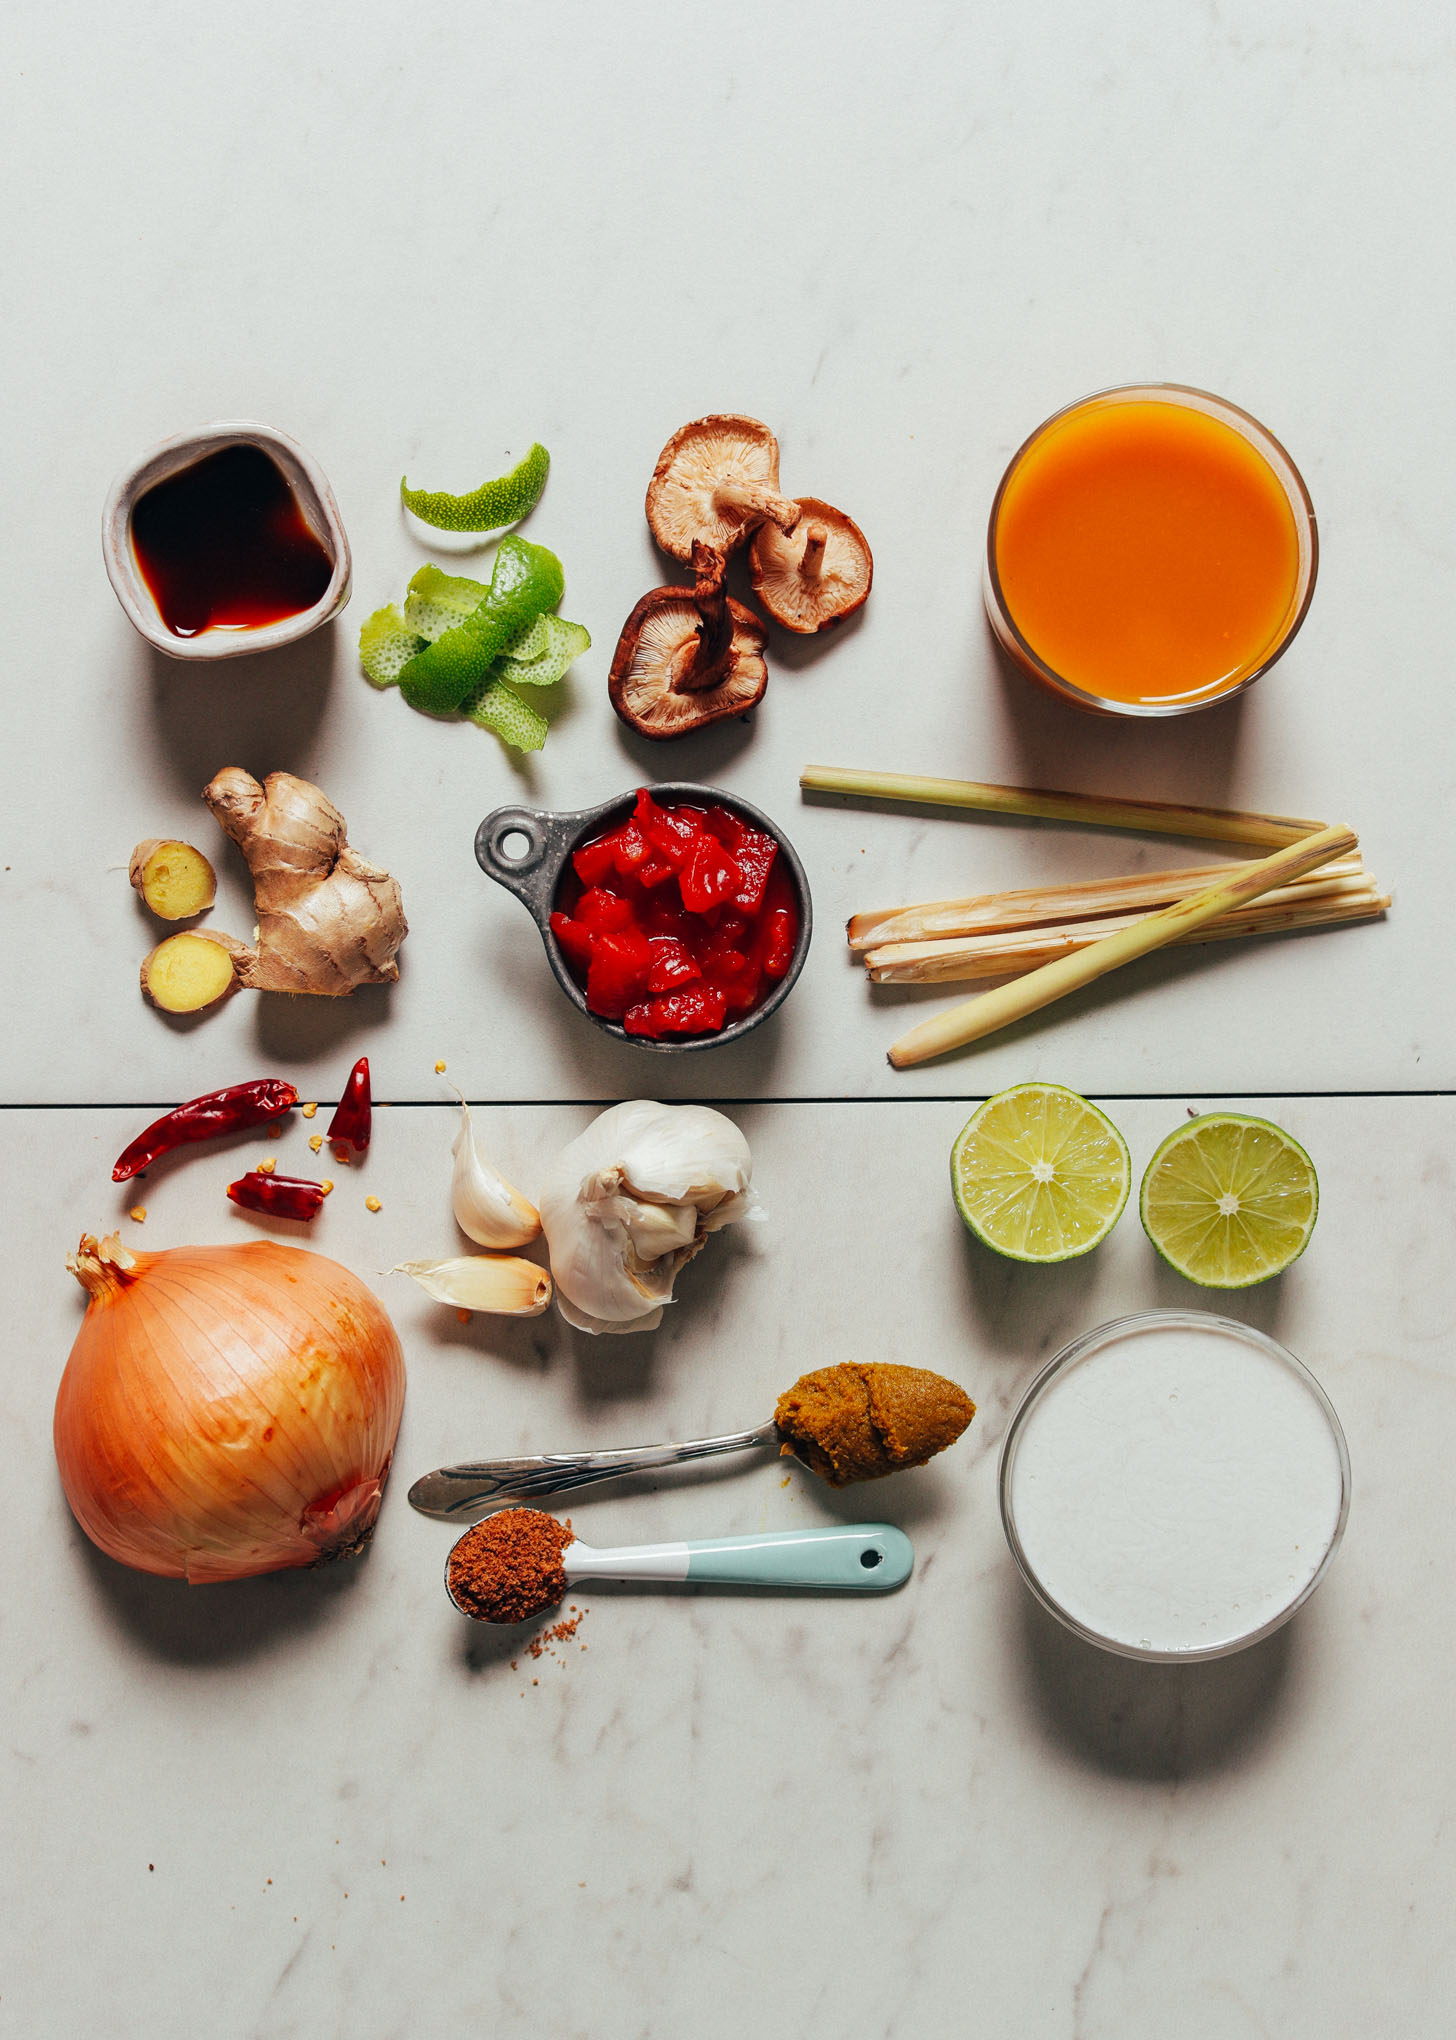 Ingredients for making our simple 1-Pot Vegan Tom Yum Soup recipe